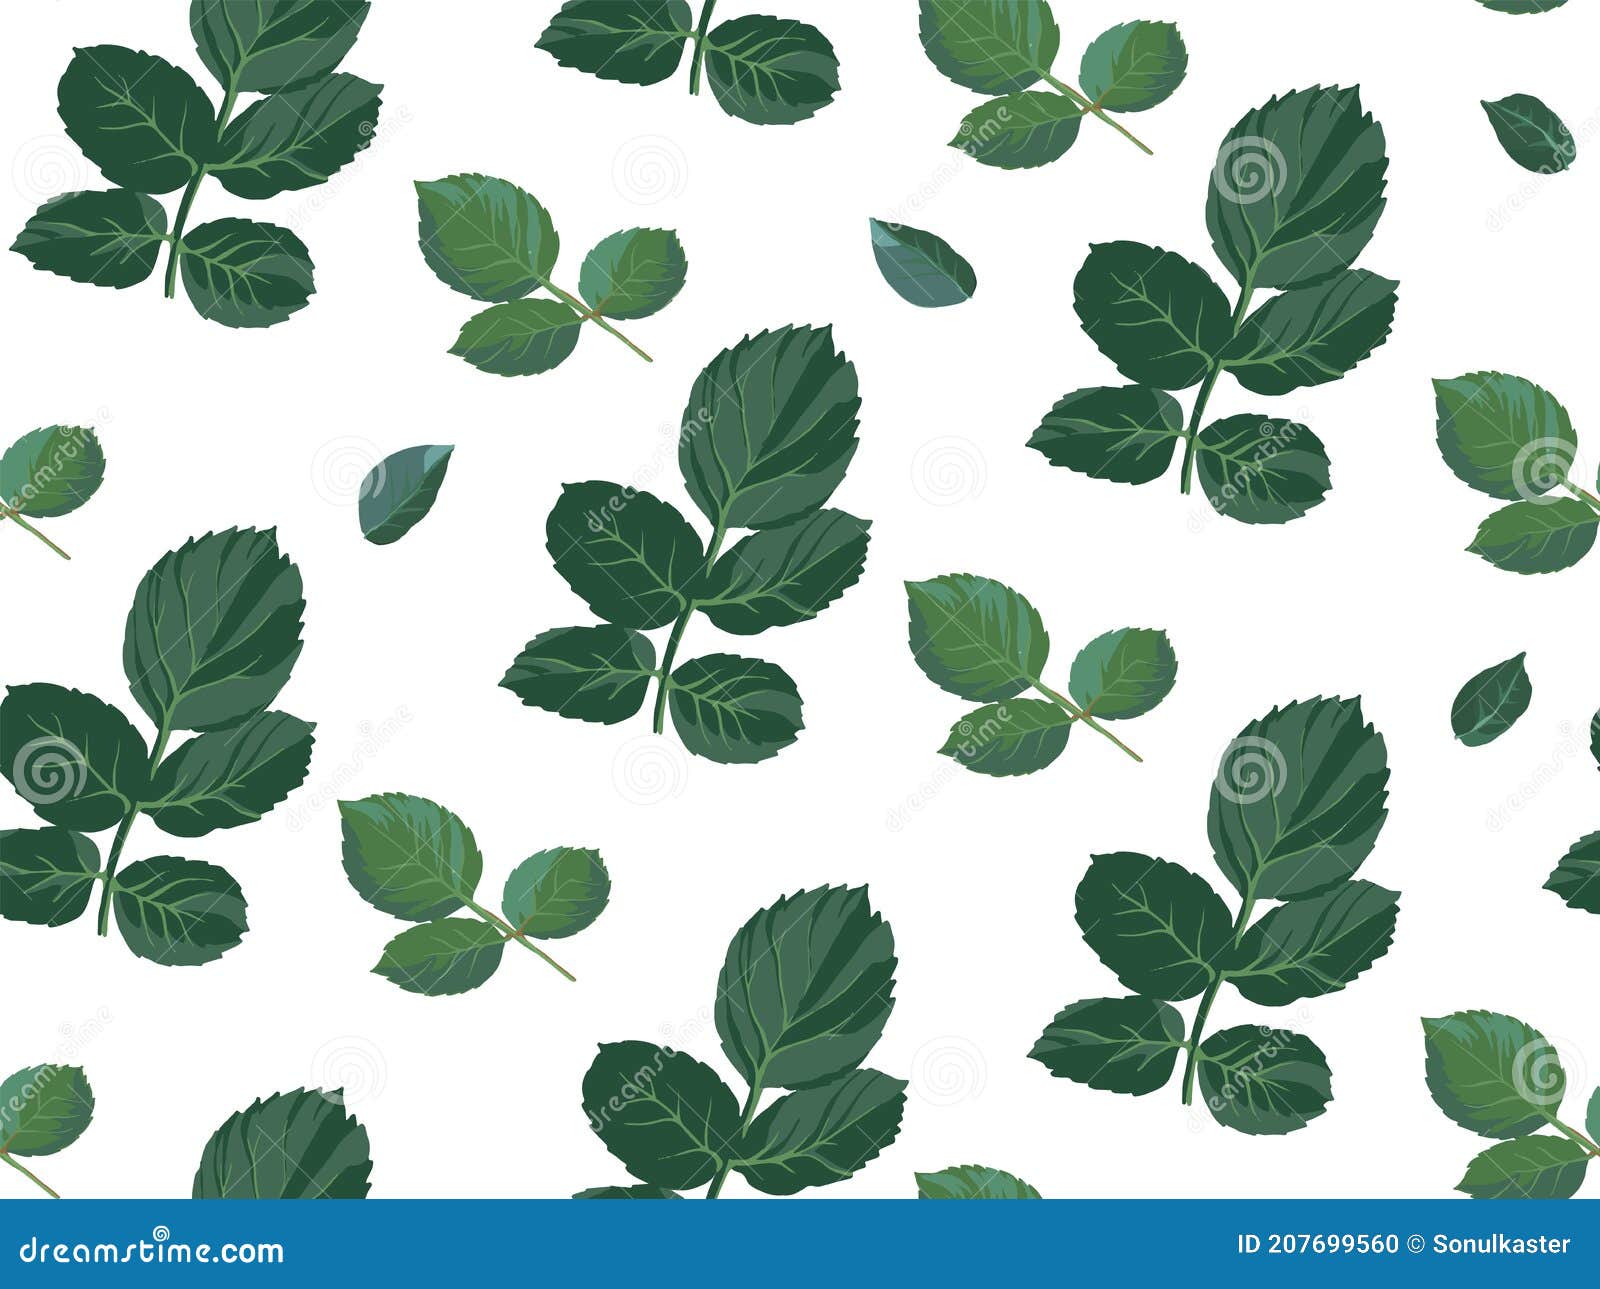 Green stems and leaves seamless pattern on white Vector Image